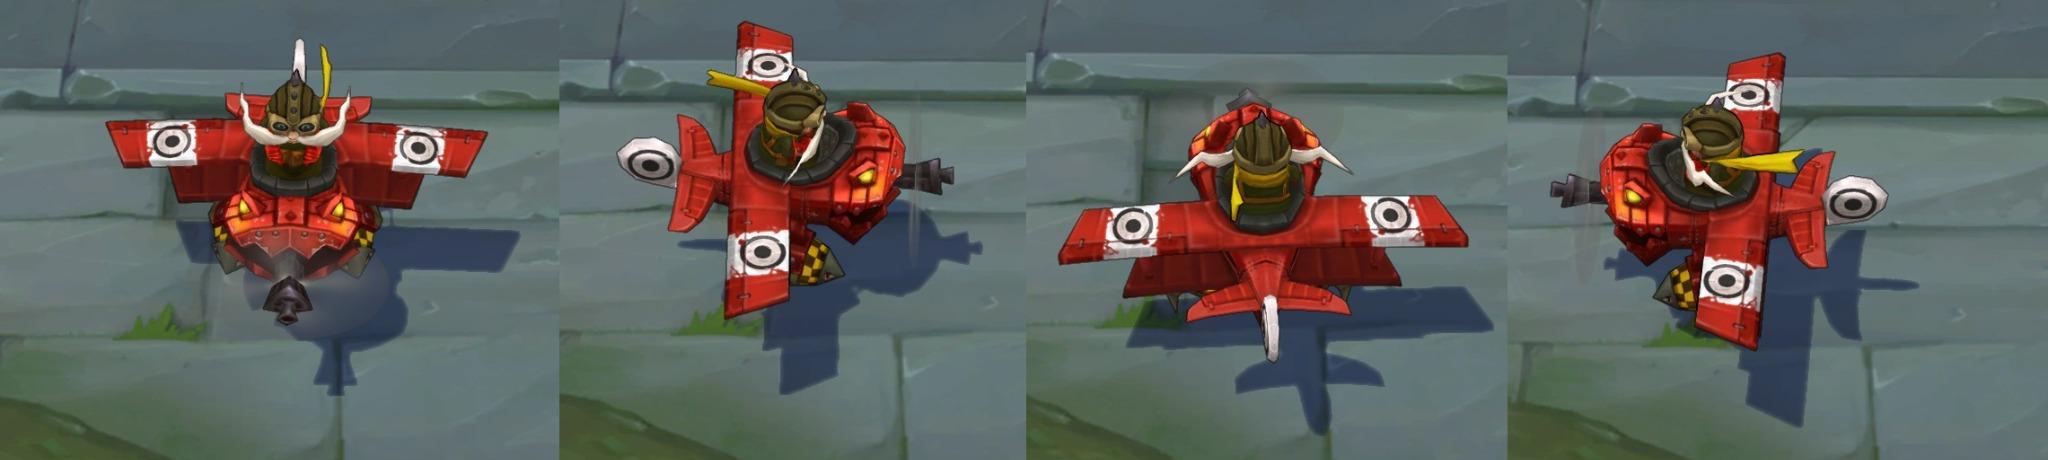 moobeat on Twitter: "Red Corki texture #PBE old vs new, front , zoomed out http://t.co/fTKEHnErgF" / Twitter